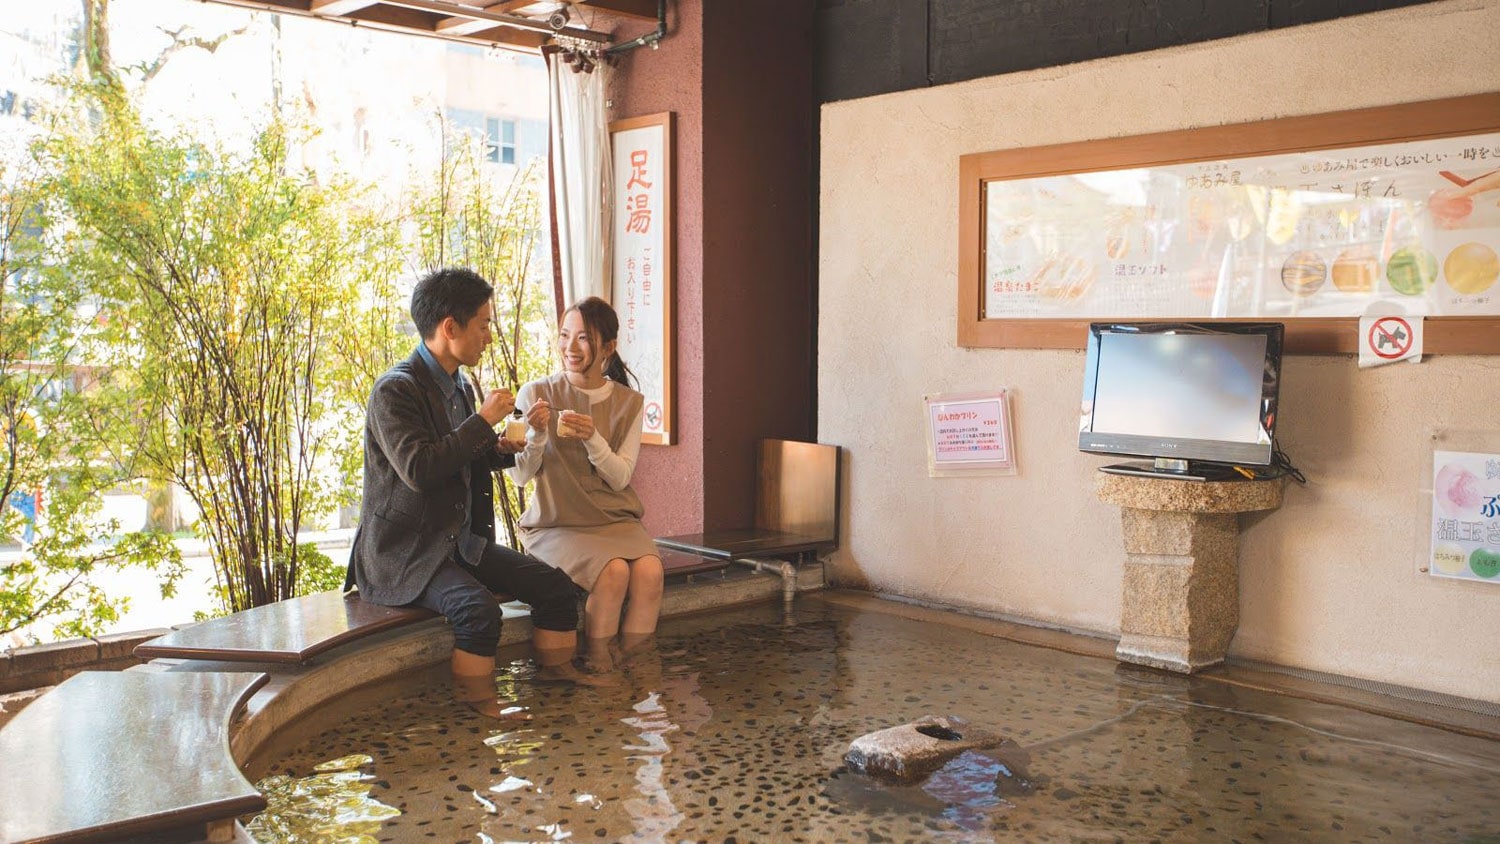 After checking out, take a walk in the hot spring town.